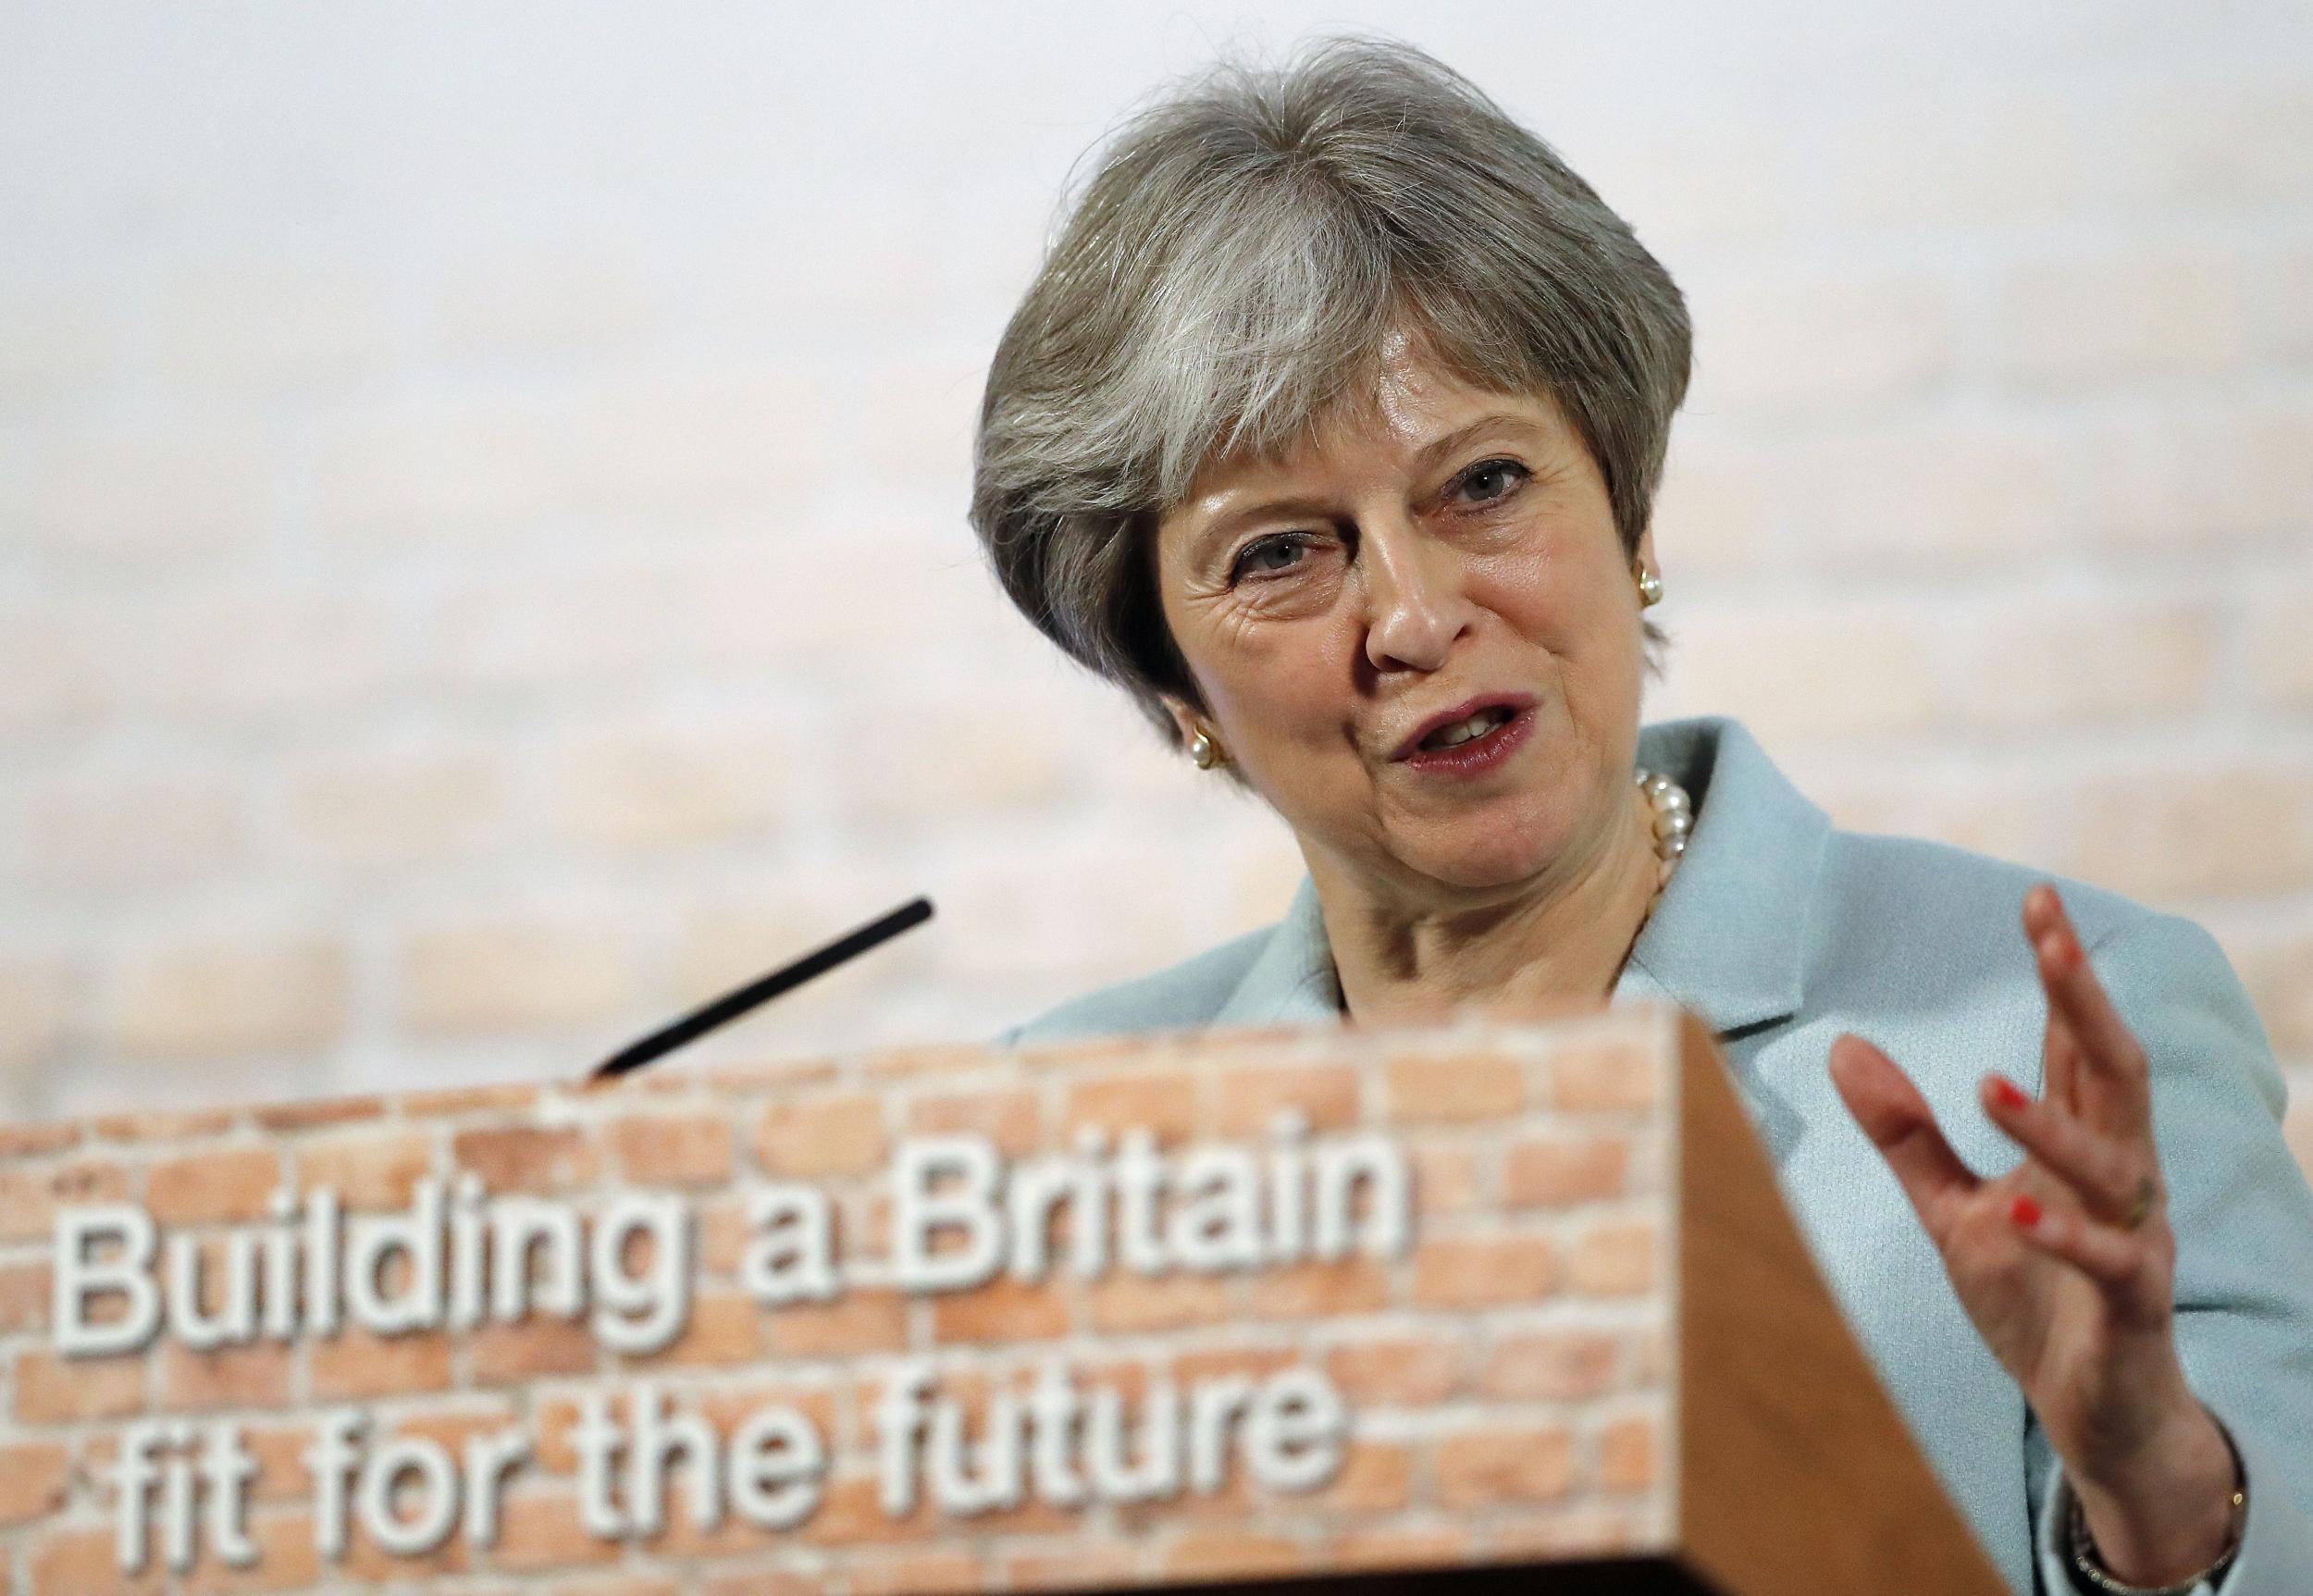 Earlier this year the prime minister said young people without family wealth were right to be angry about their inability to get onto the property ladder